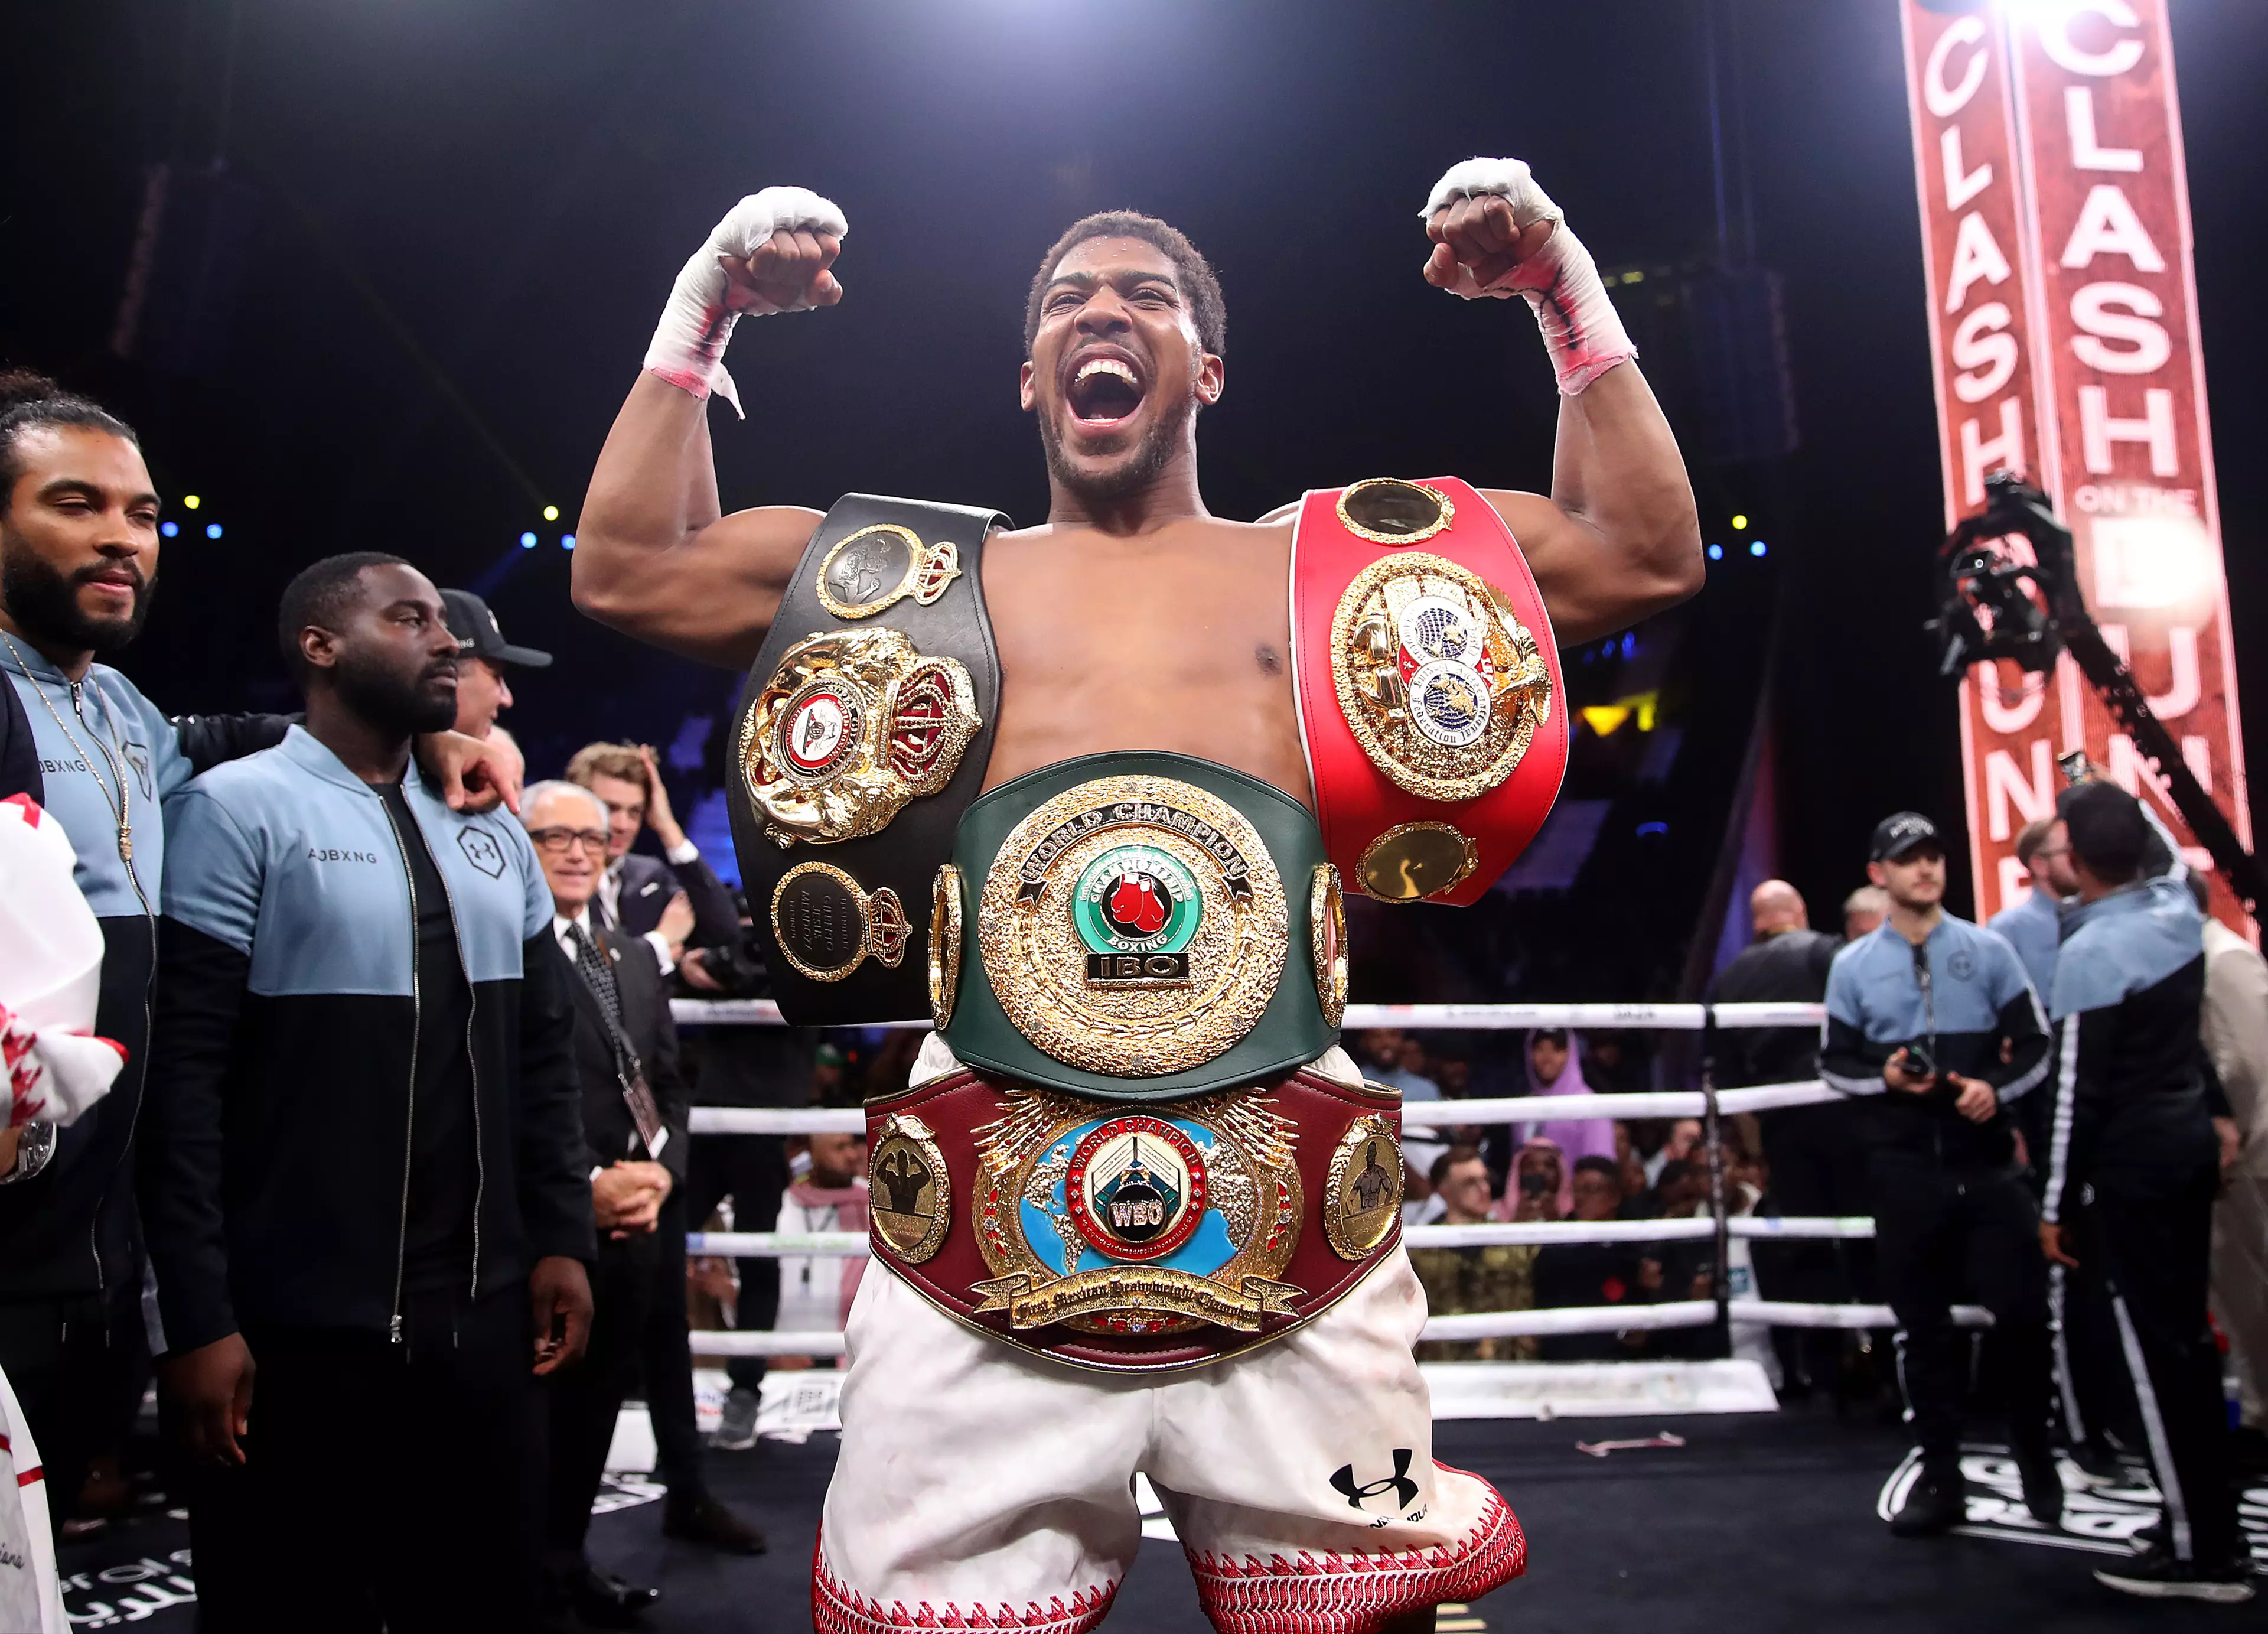 AJ stopped Kubrat Pulev in December last year to defend his WBO, WBA and IBF titles